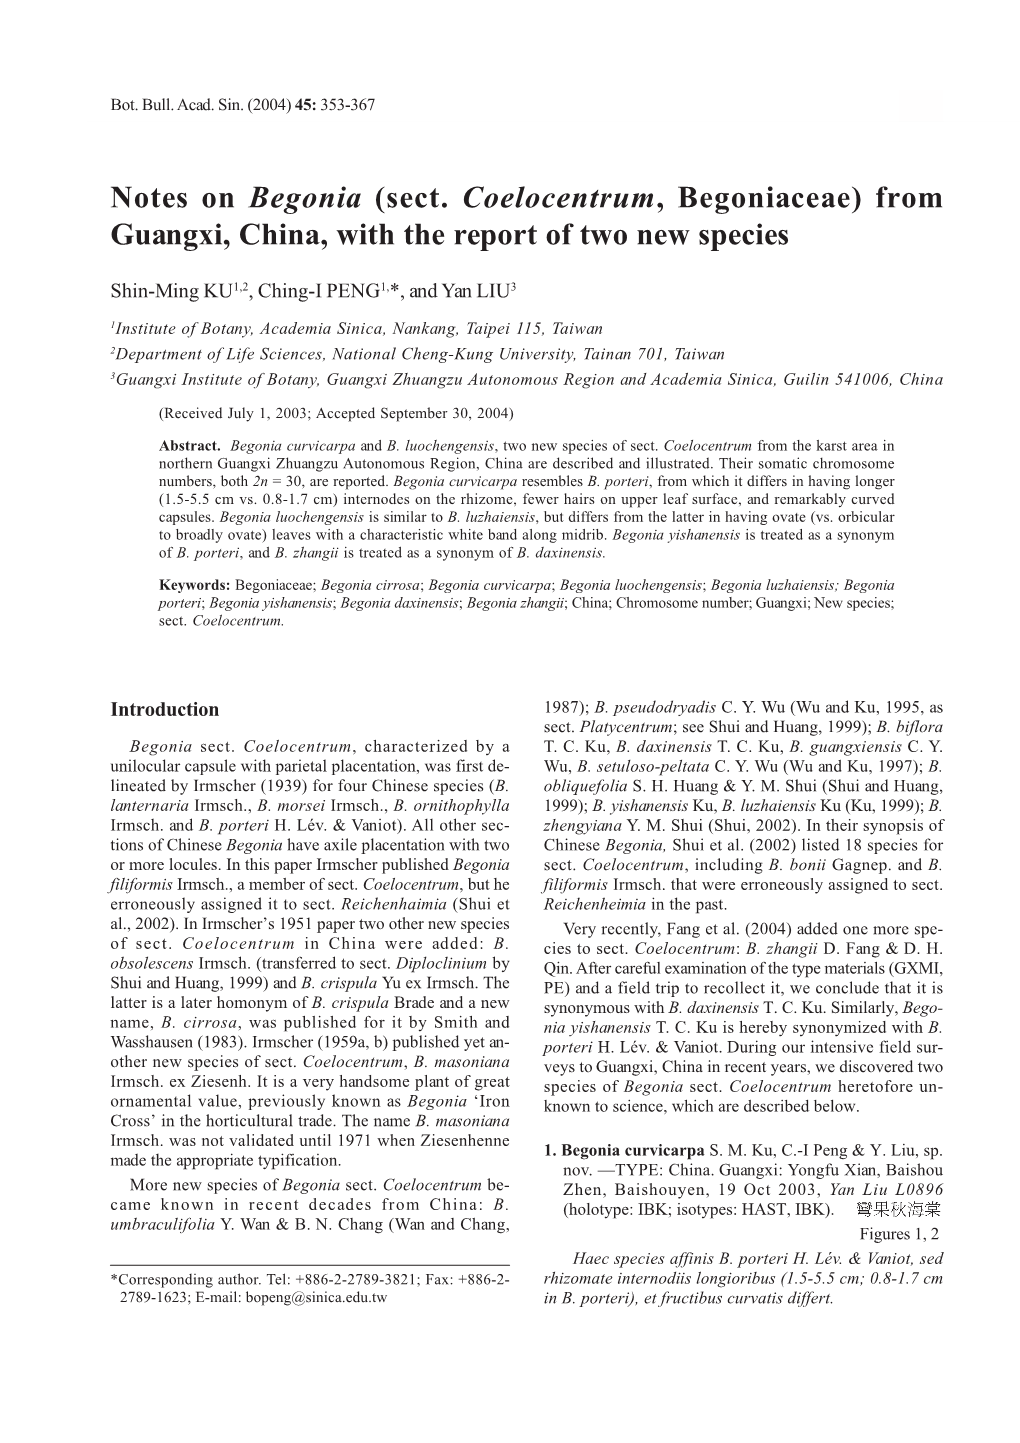 Notes on Begonia (Sect. Coelocentrum, Begoniaceae) from Guangxi, China, with the Report of Two New Species